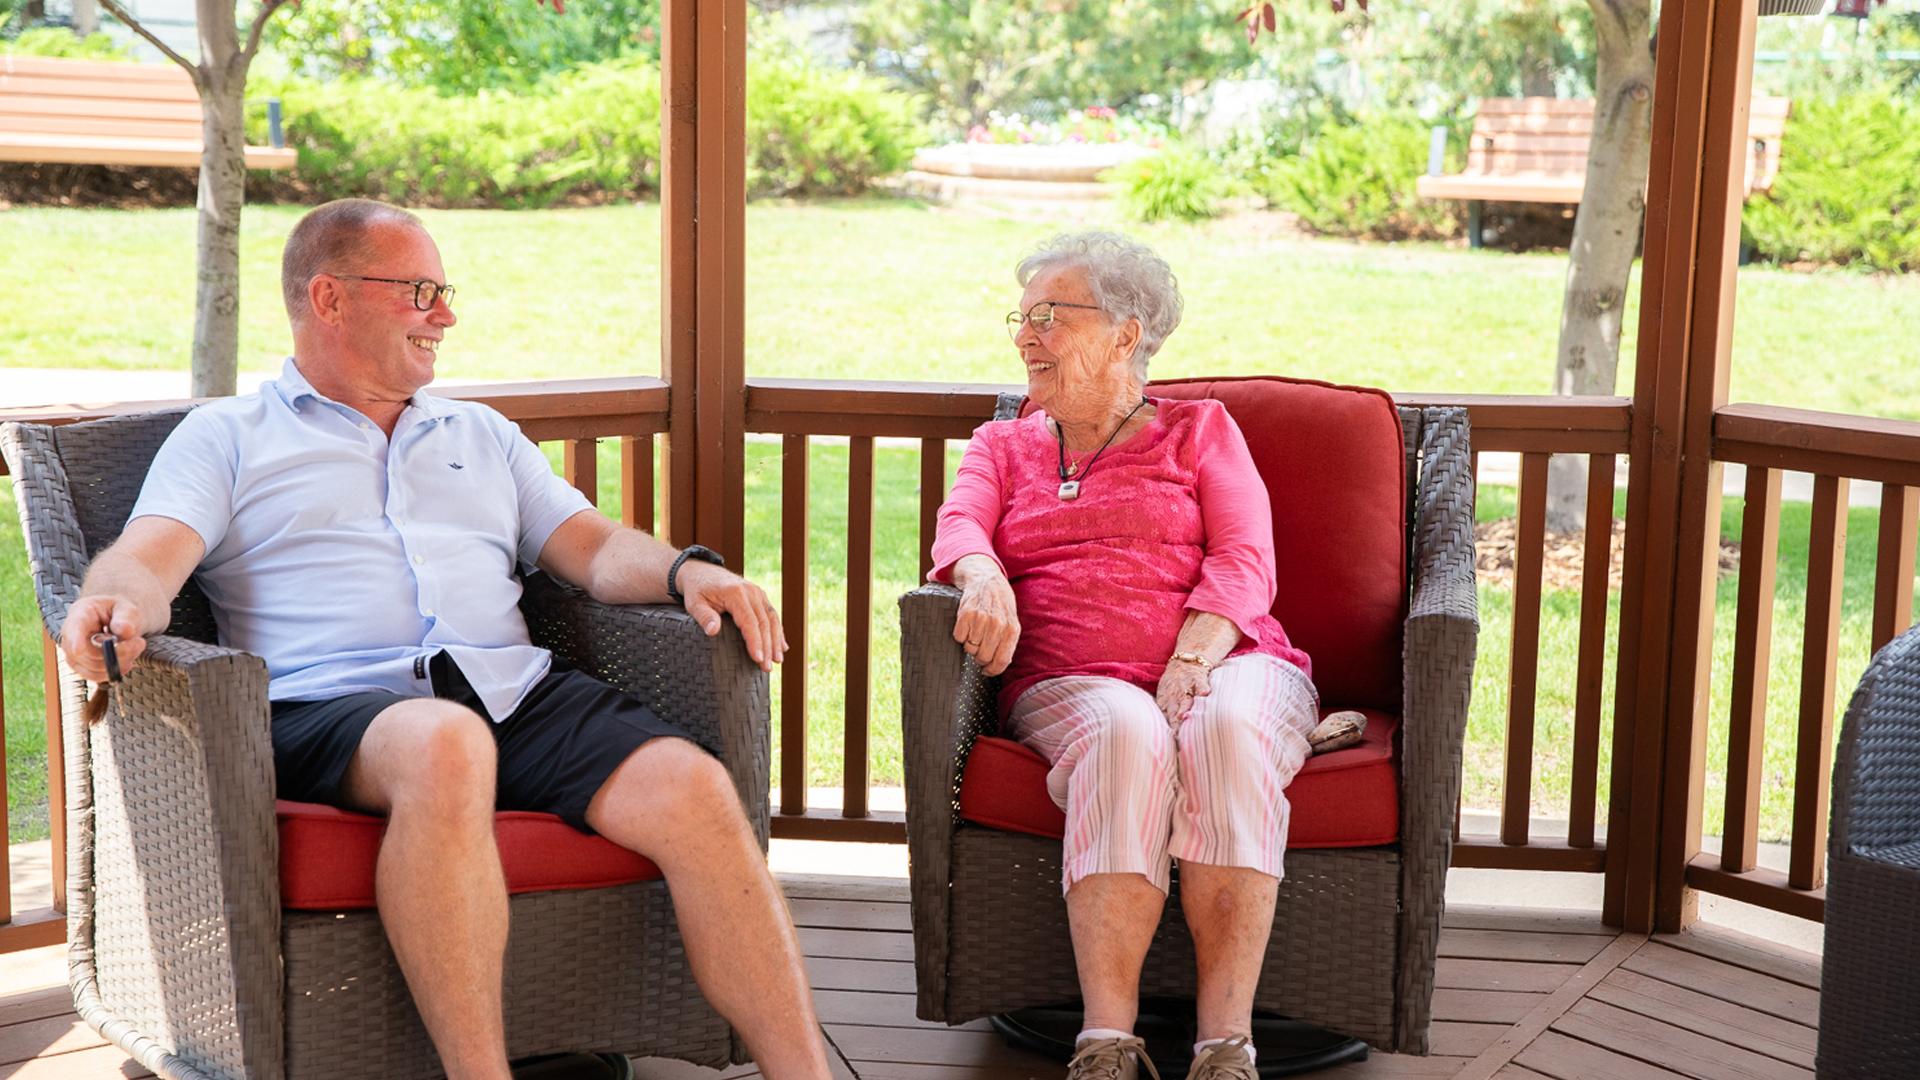 Senior seated with a loved one outdoors. Both people are smiling.